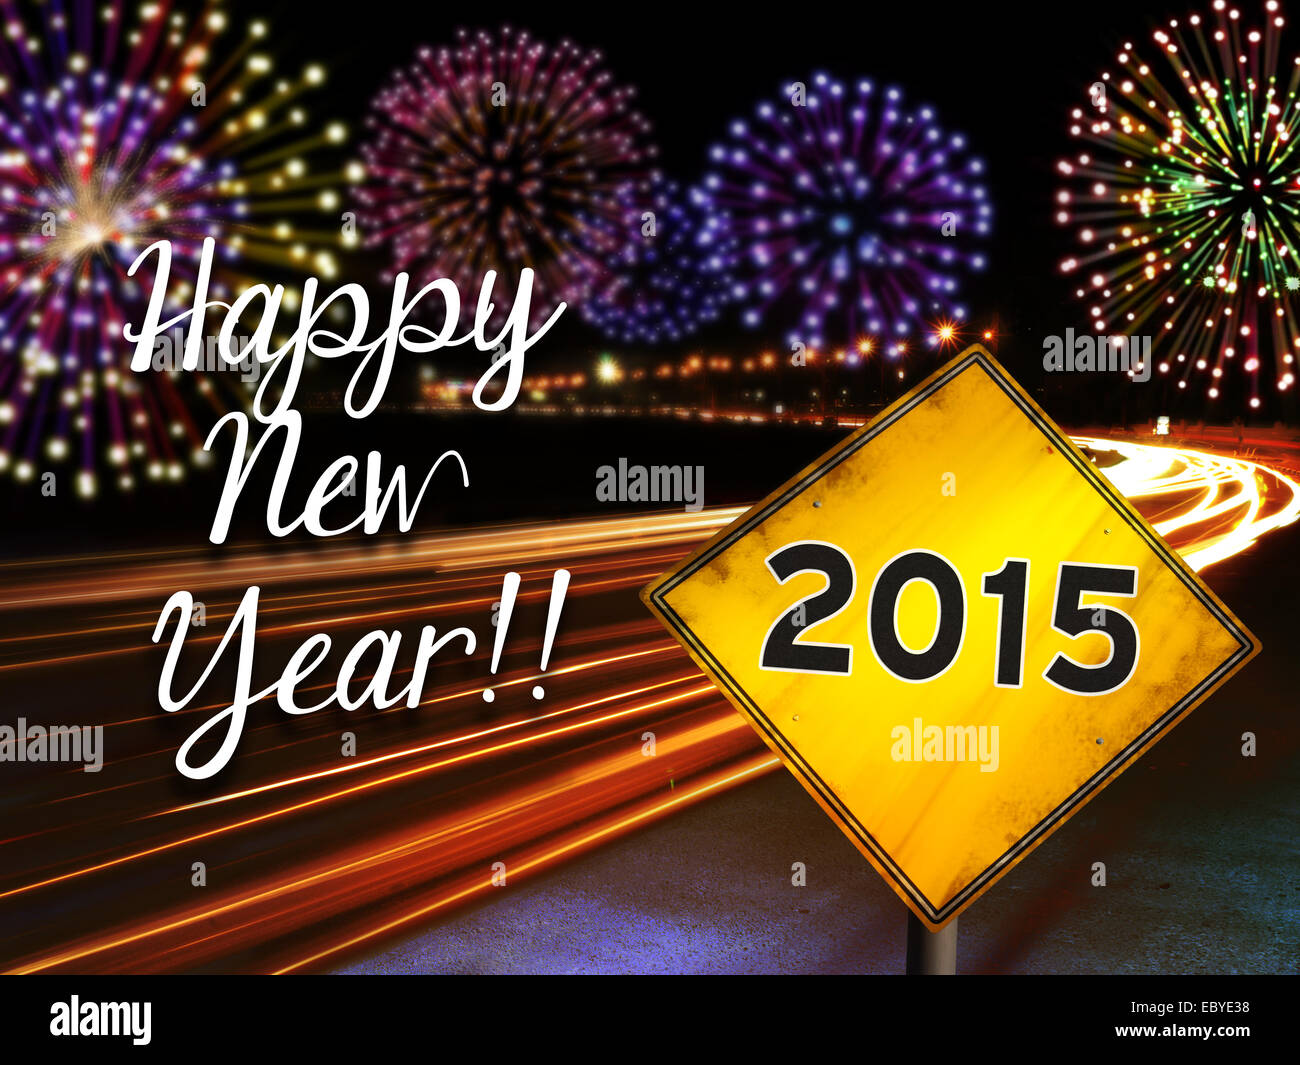 Happy New Year 2015 fireworks and city cars highway lights with yellow road sign. Greeting card design background. Stock Photo